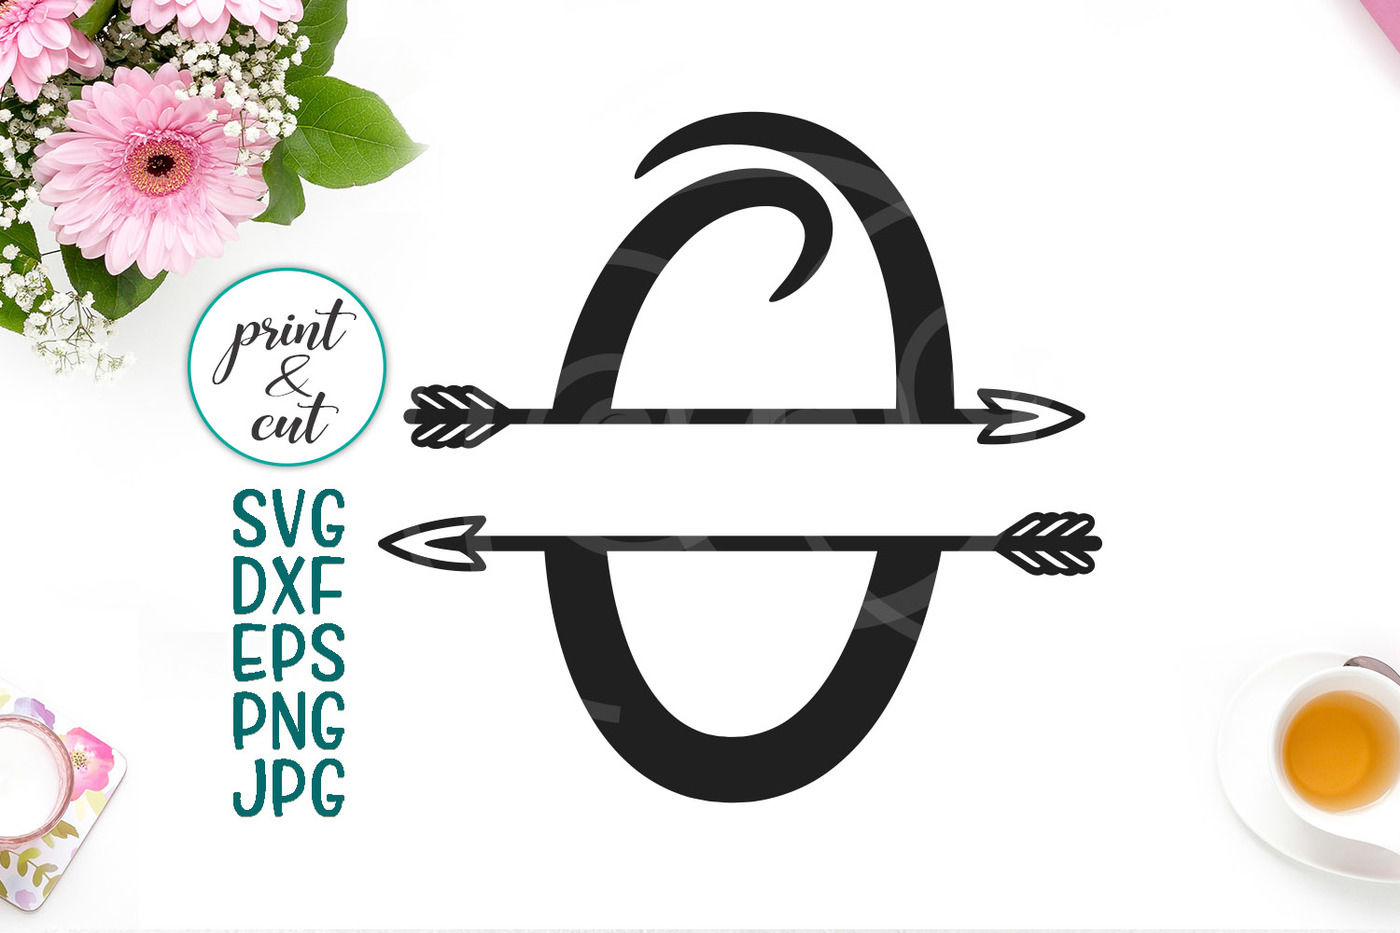 Circle Monogram Arrow SVG - SVG EPS PNG DXF Cut Files for Cricut and  Silhouette Cameo by SavanasDesign